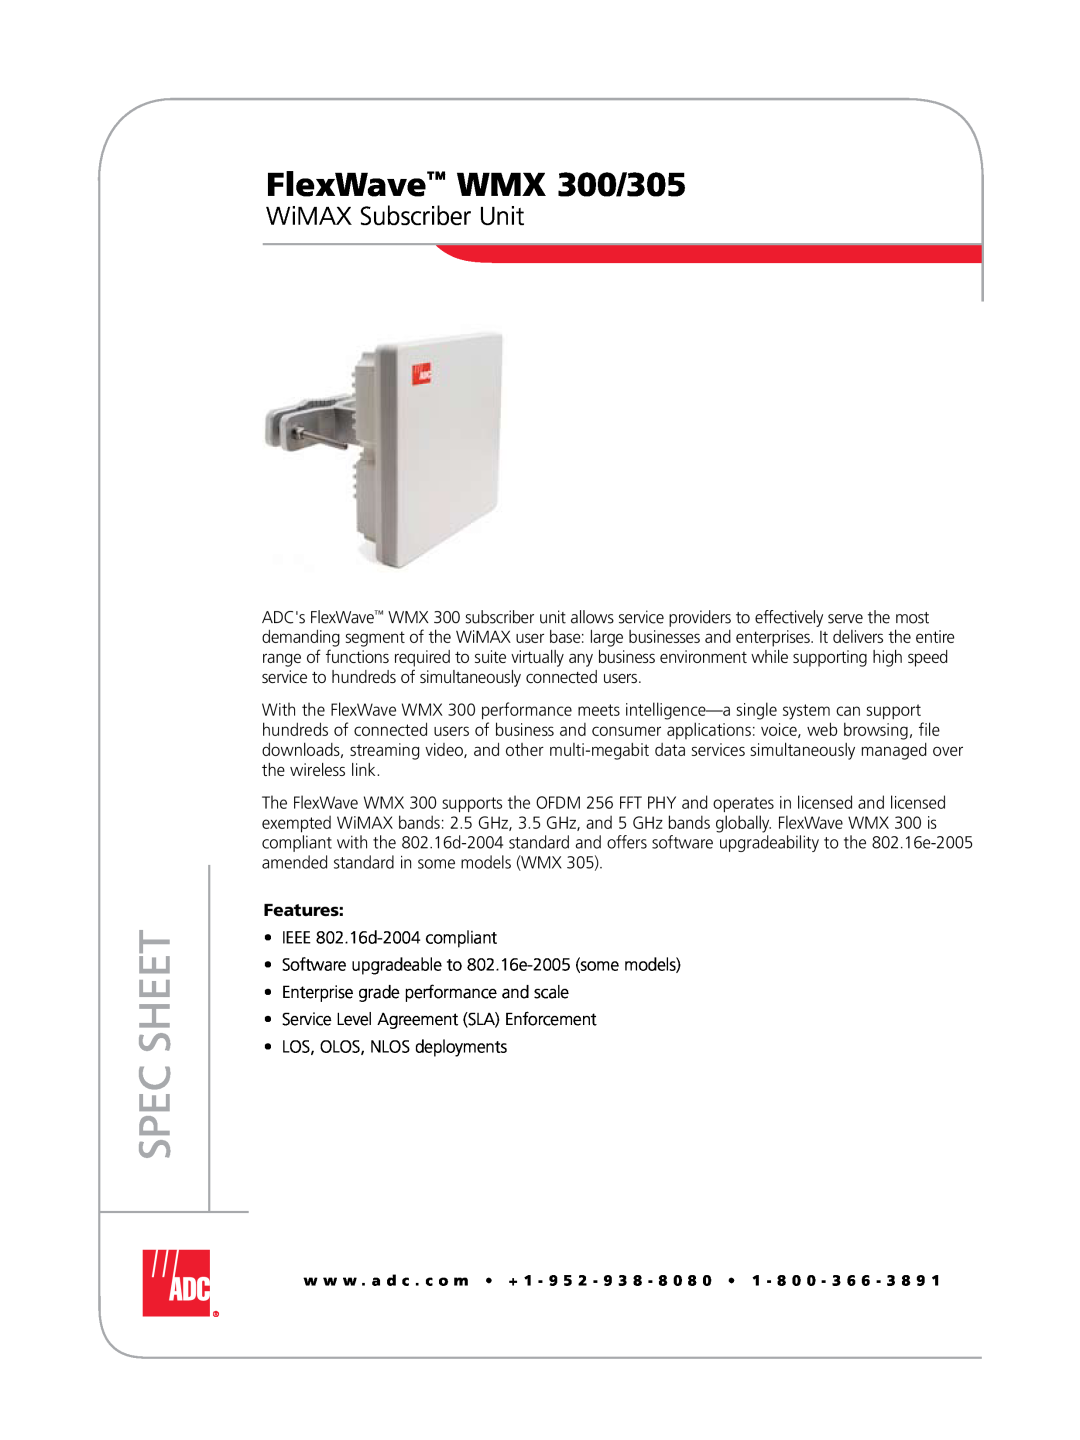 ADC manual FlexWave WMX 300/305, WiMAX Subscriber Unit, Features, Spec Sheet 